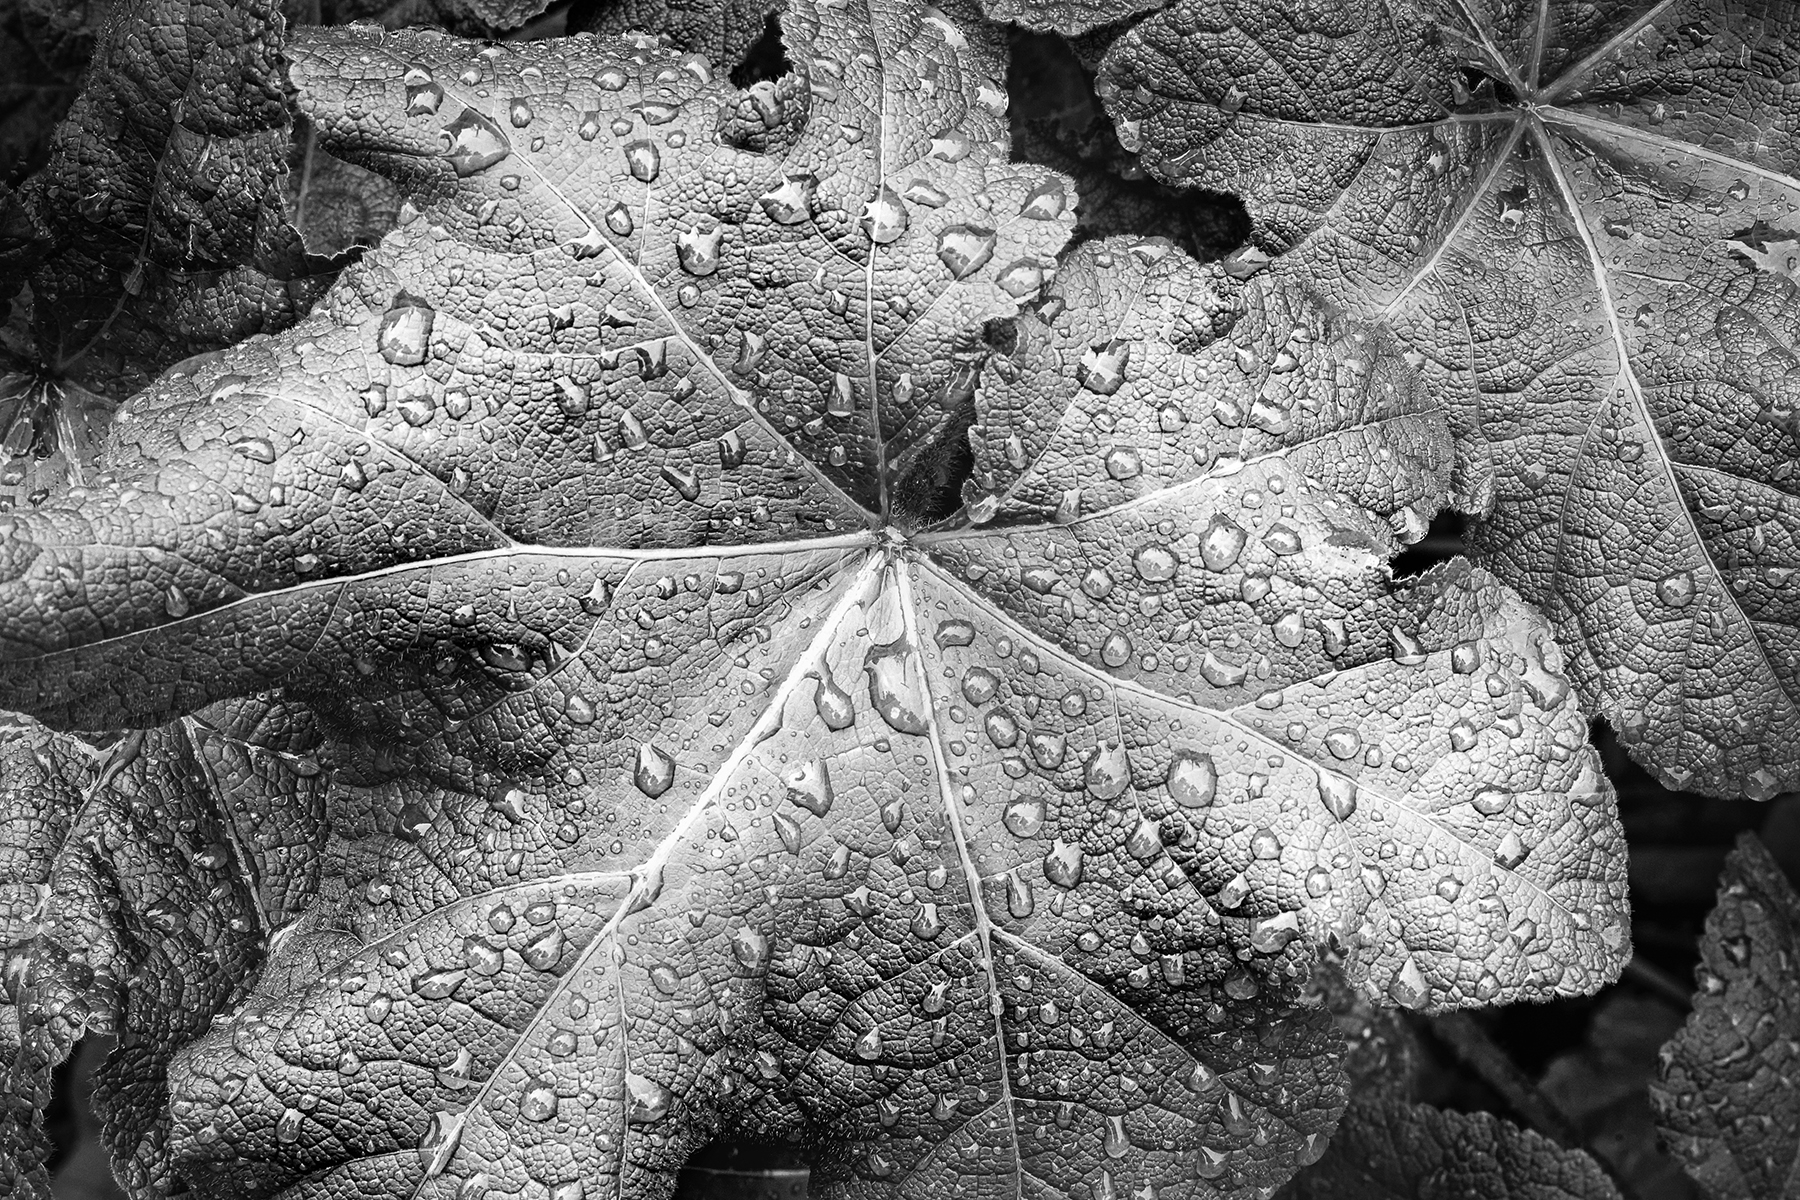 leaf-with-water-drops-MB-1-Place-by-DJ-Leland-MR